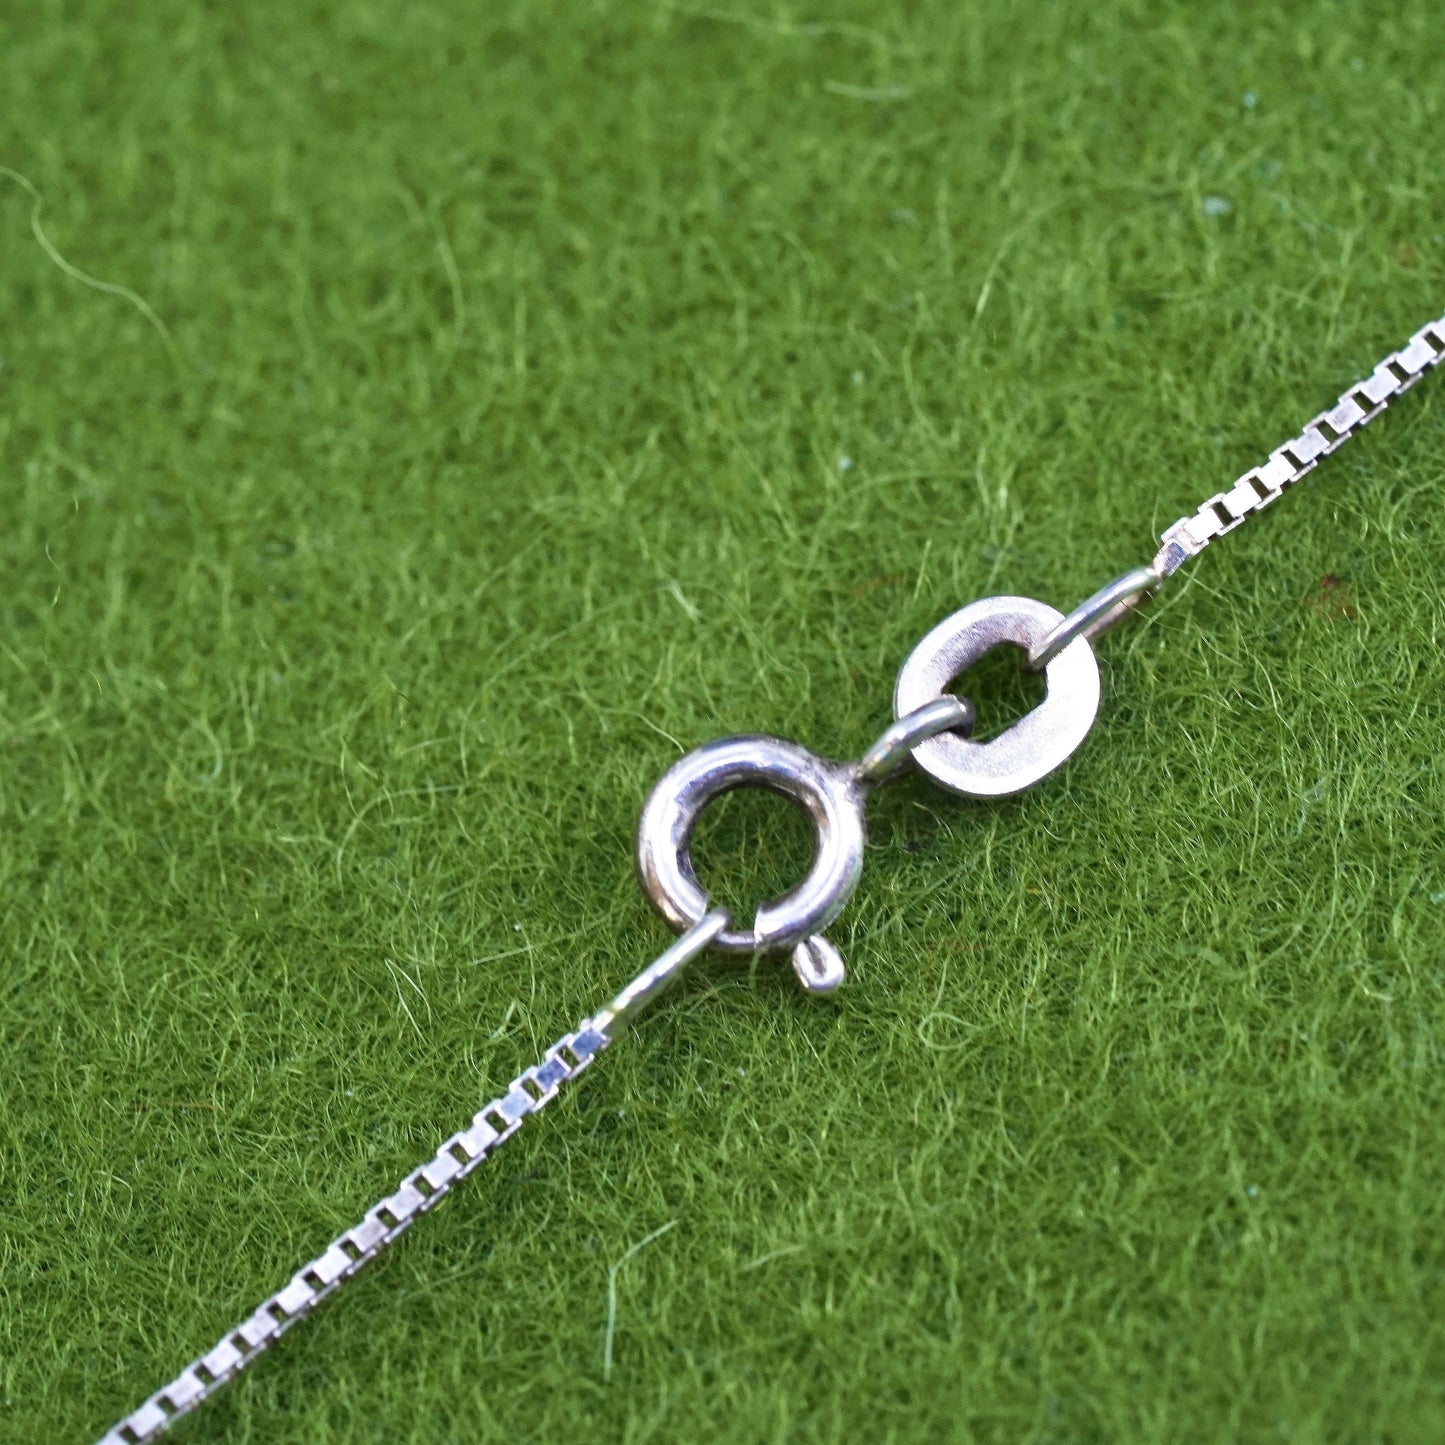 24", 1mm, Vintage Italian sterling 925 silver box chain, necklace